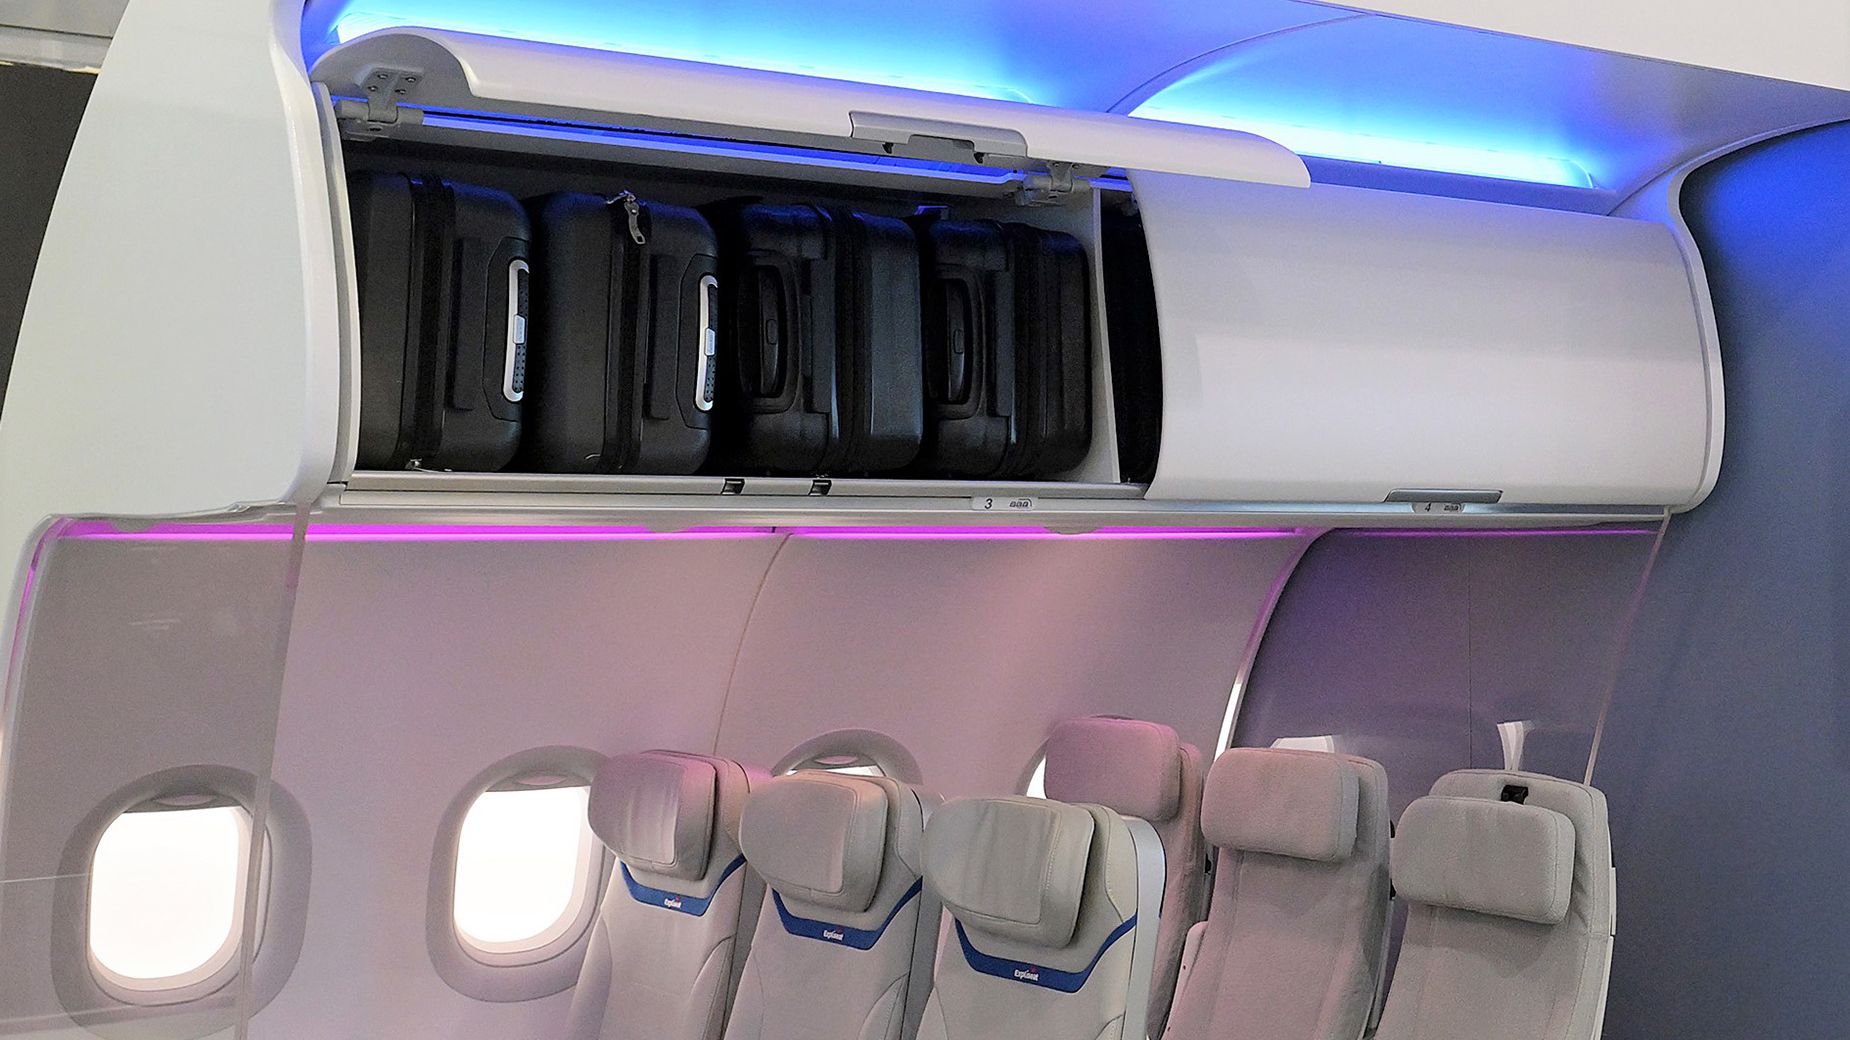 The new “Airspace L Bins,” produced by Elbe Flugzeugwerke GmbH, a subsidiary of ST Engineering and Airbus, promise to create 60% more cabin luggage space.